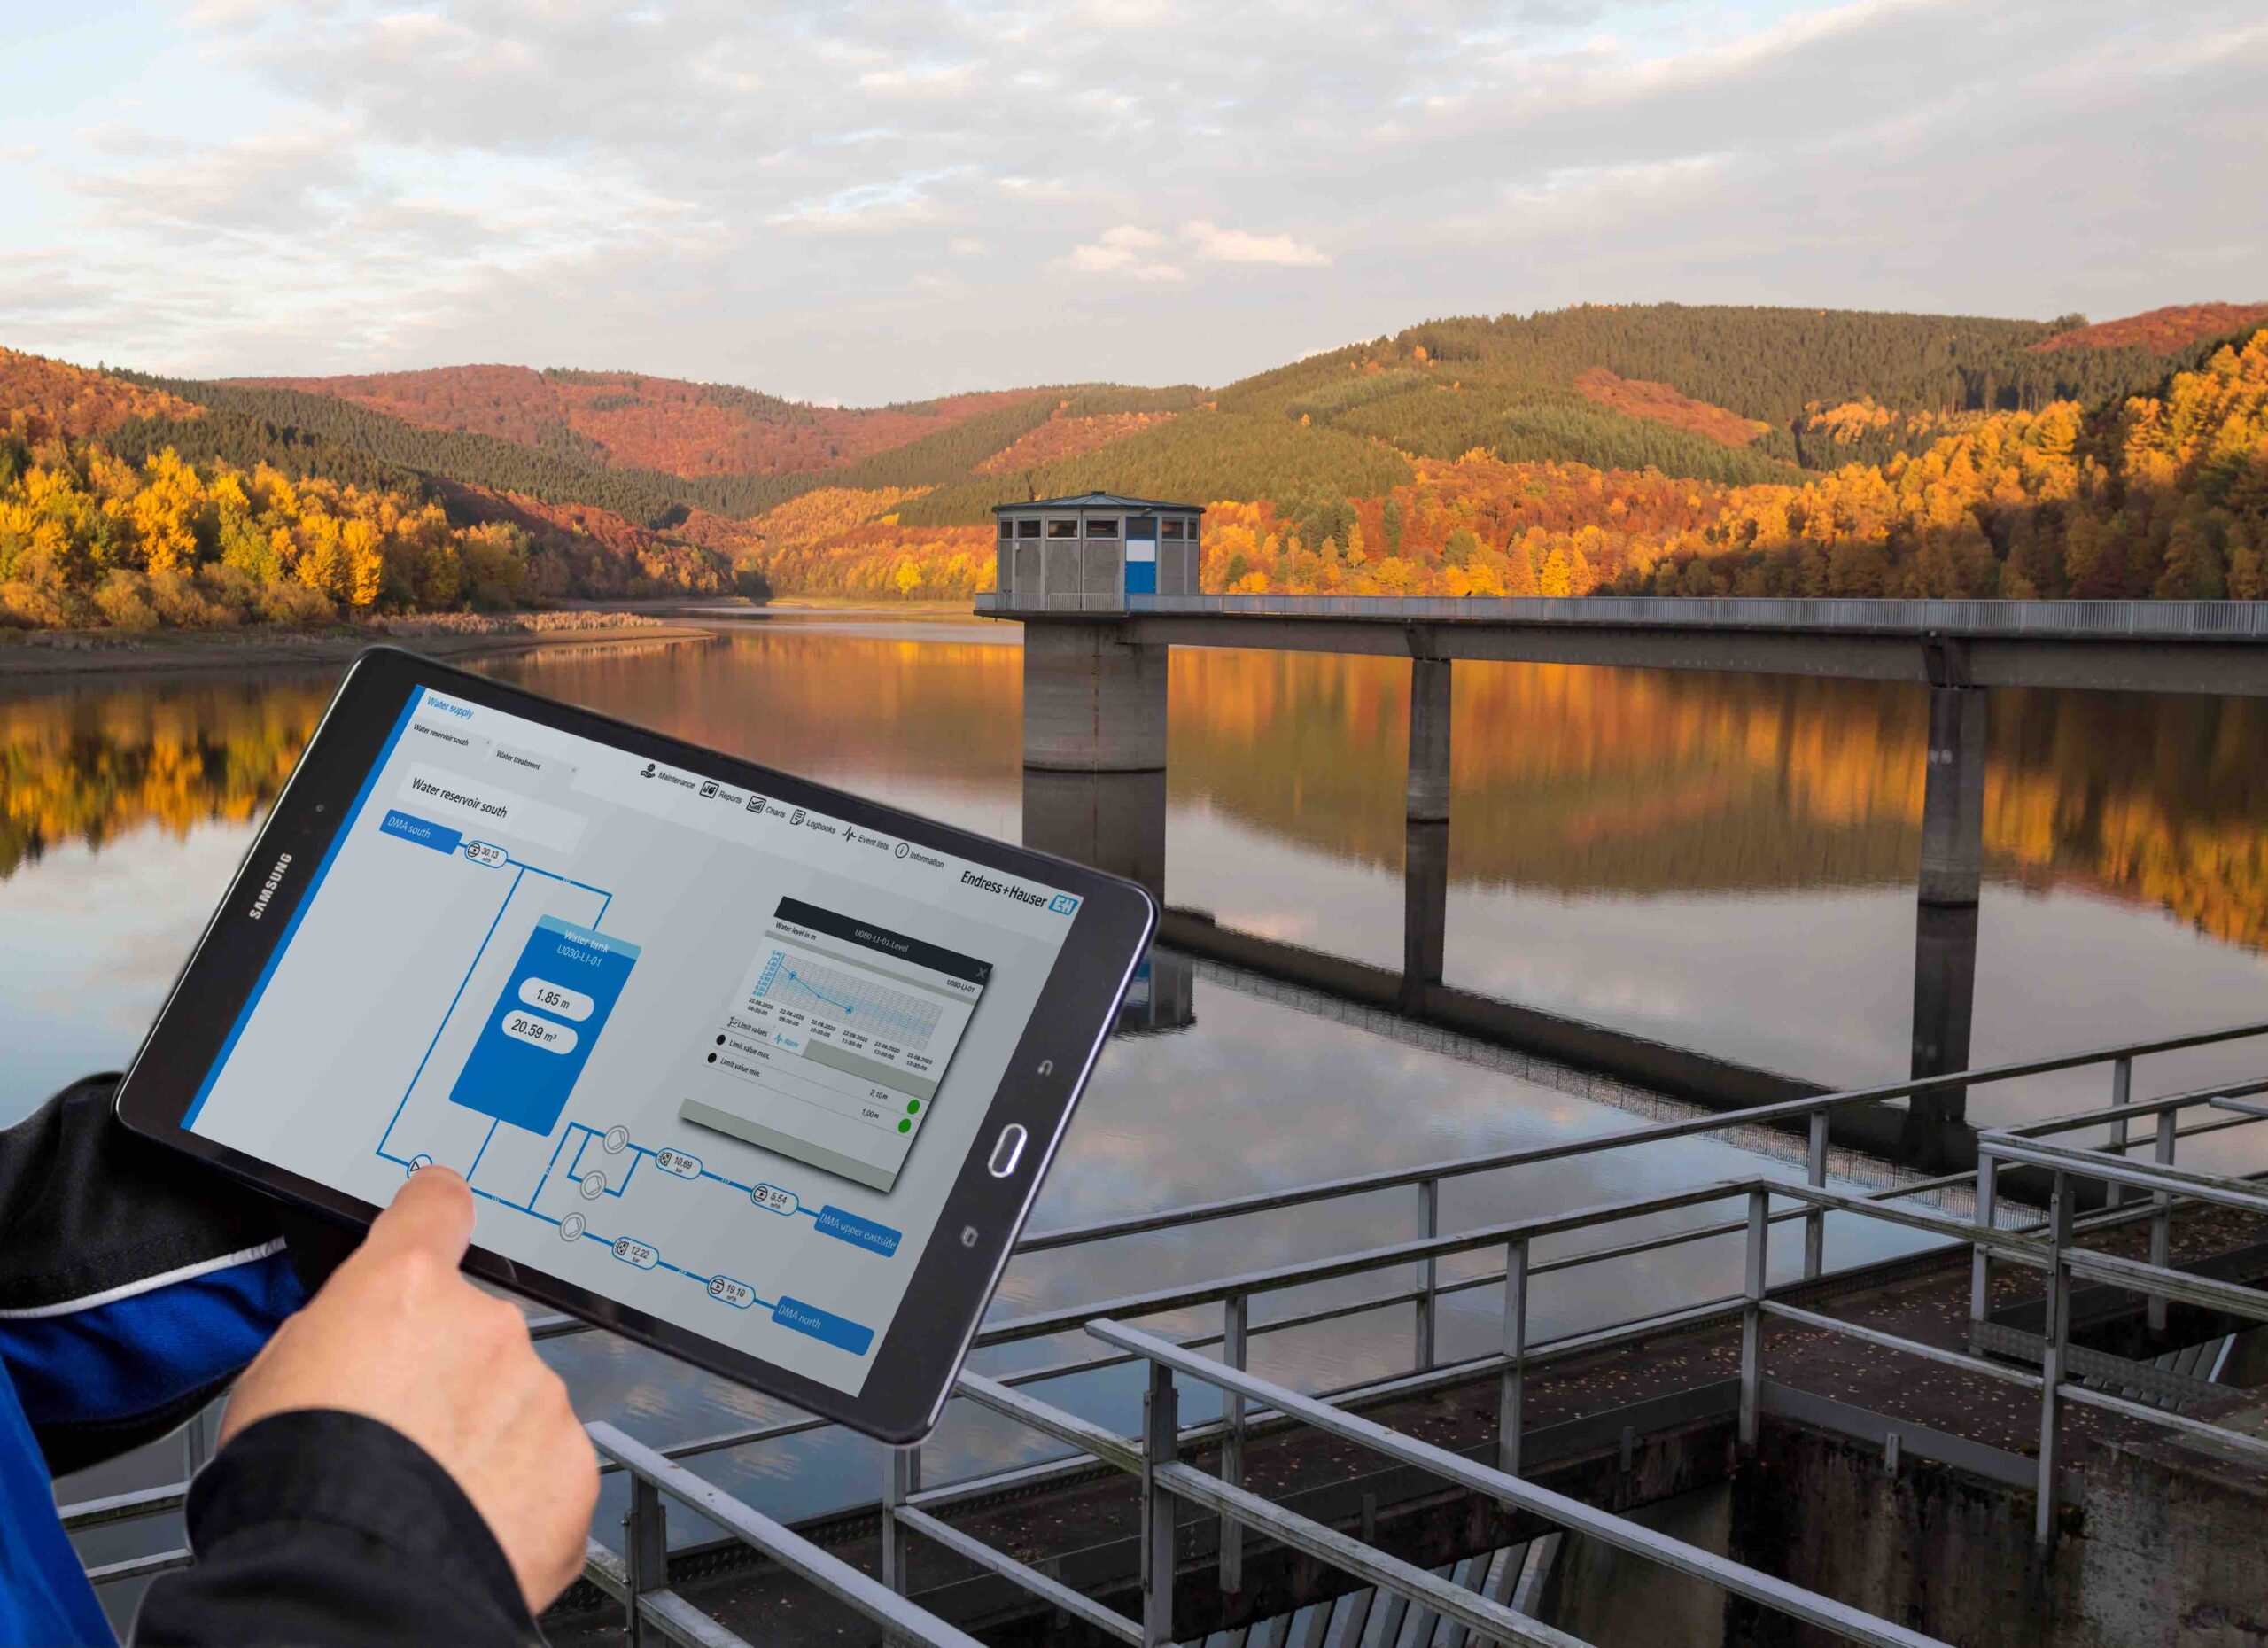 Cloud-based software service connects all levels of water supply systems